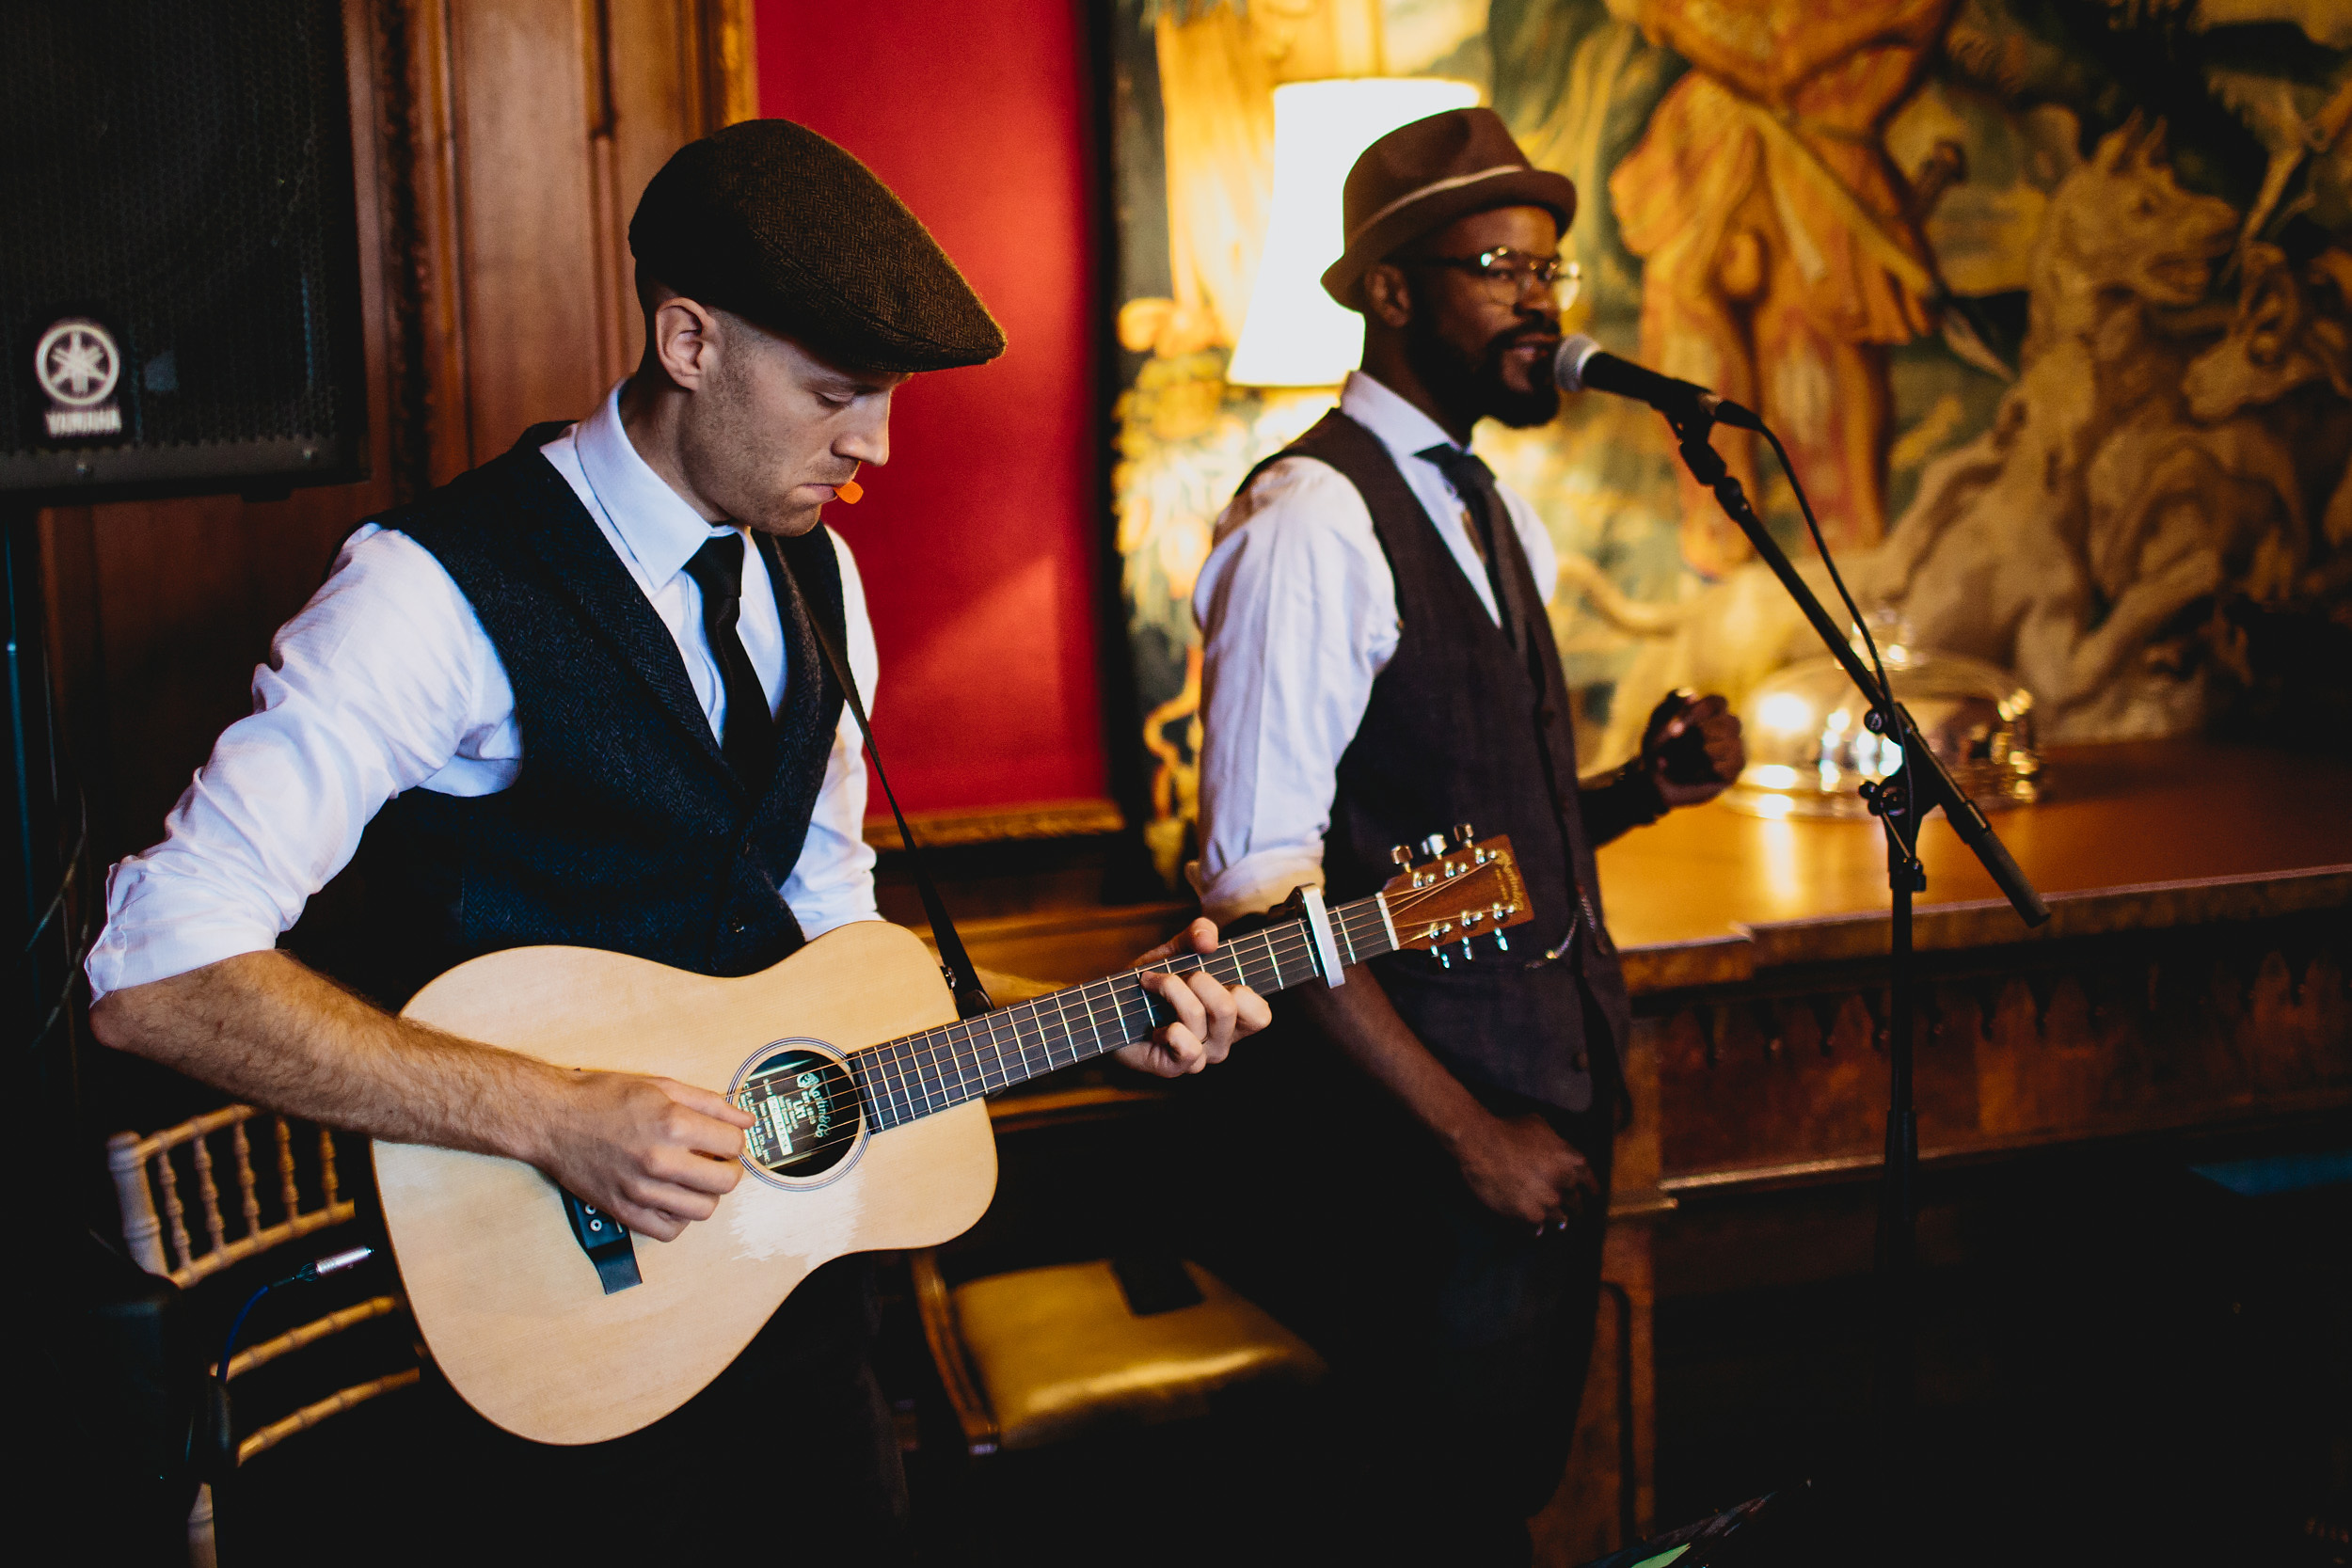 Music duo perform at a wedding ceremony in Cheshire